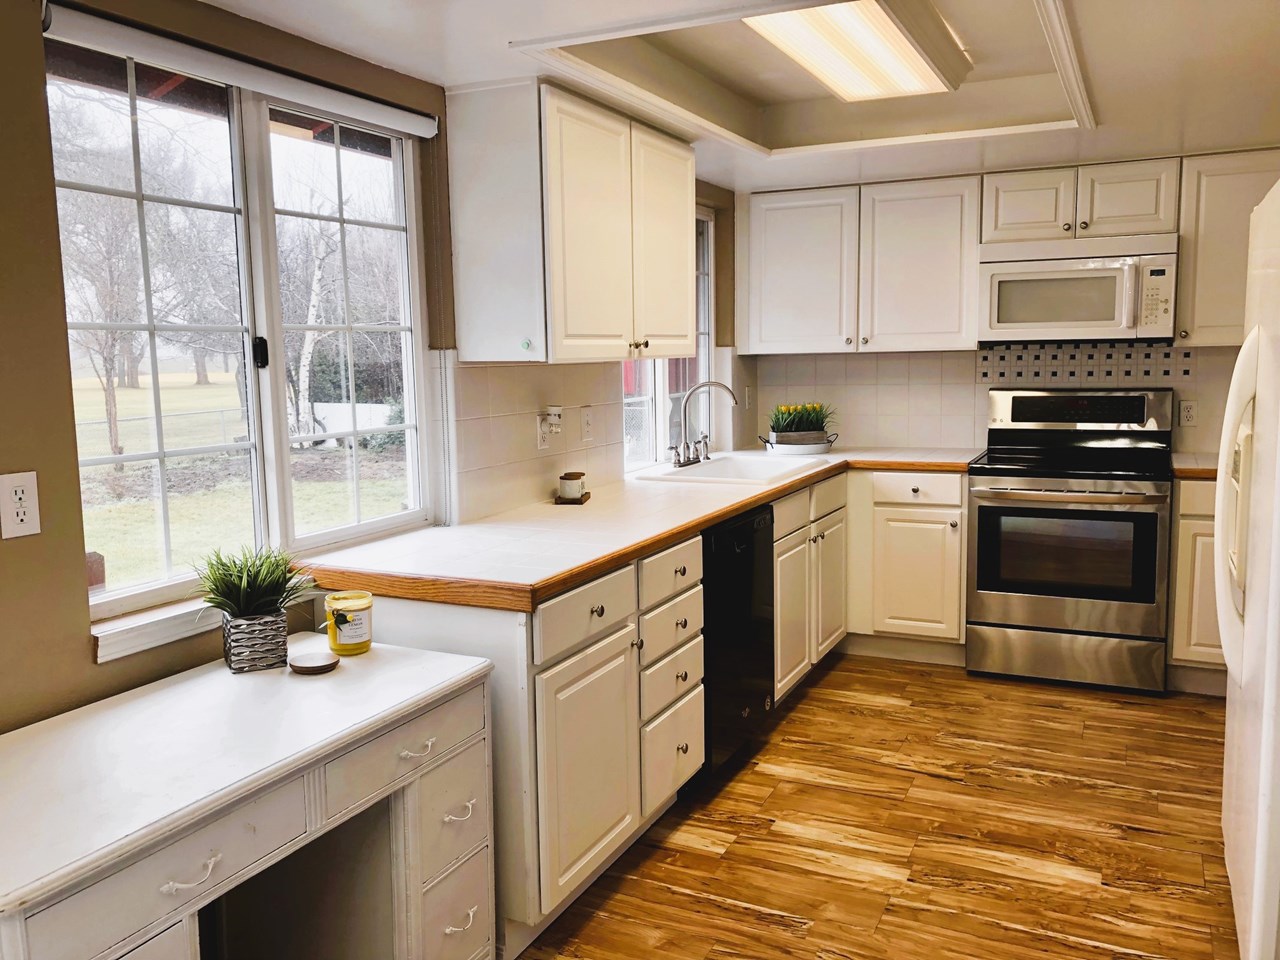 kitchen white cabinetry with full appliance package included